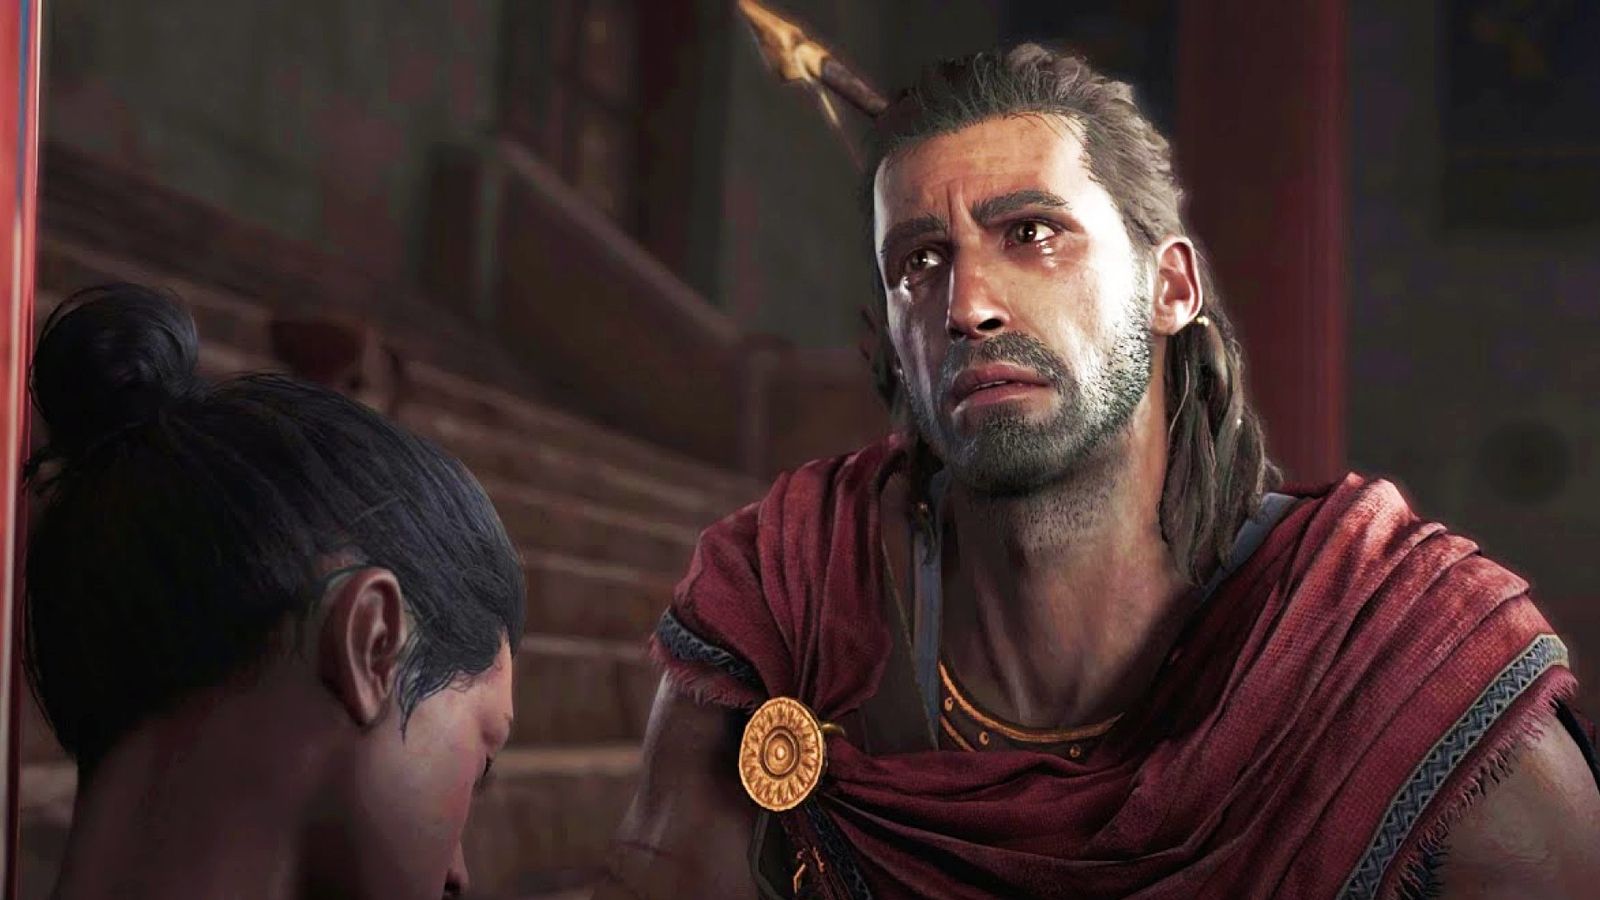 Assassin's Creed Odyssey - man with long brown hair and red cape cries over a woman with her head bowed.